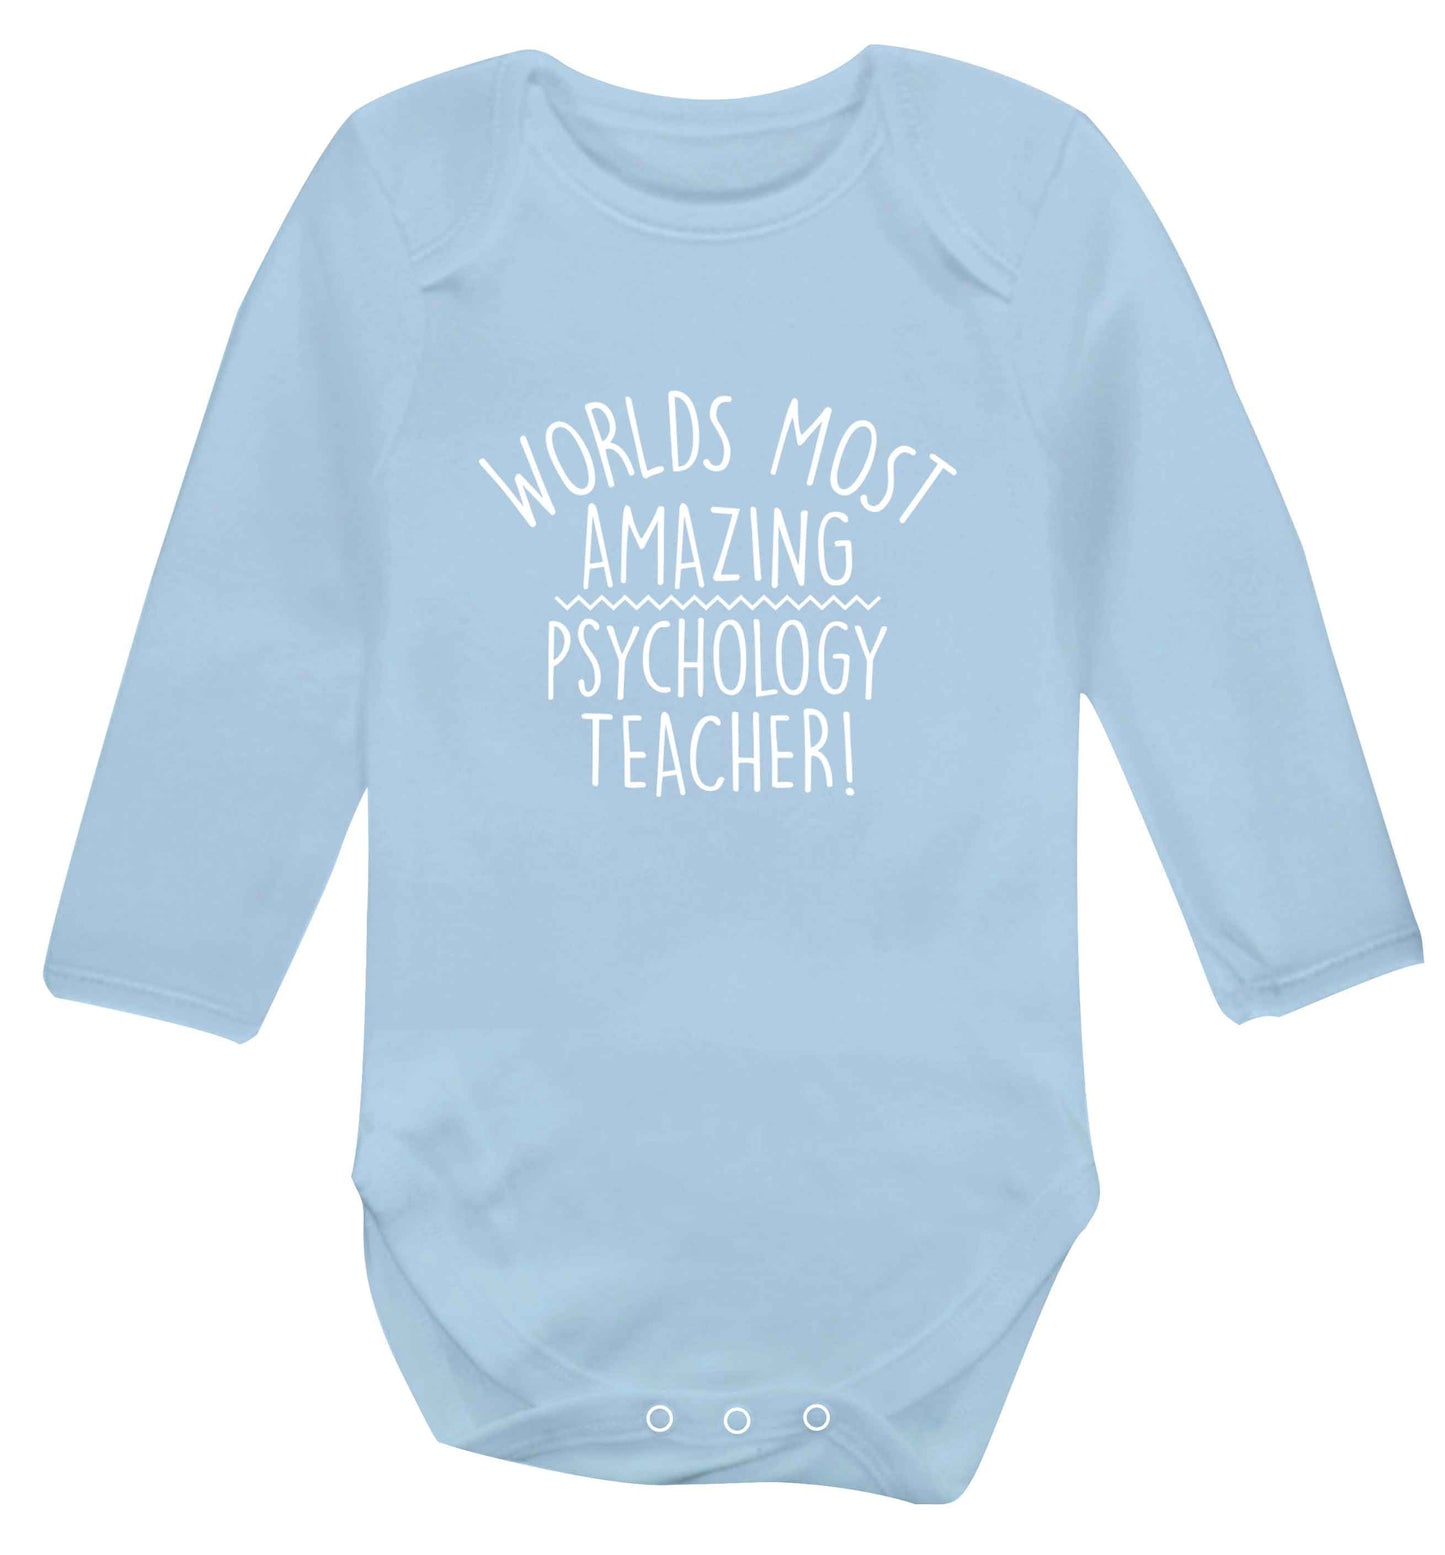 Worlds most amazing psychology teacher baby vest long sleeved pale blue 6-12 months